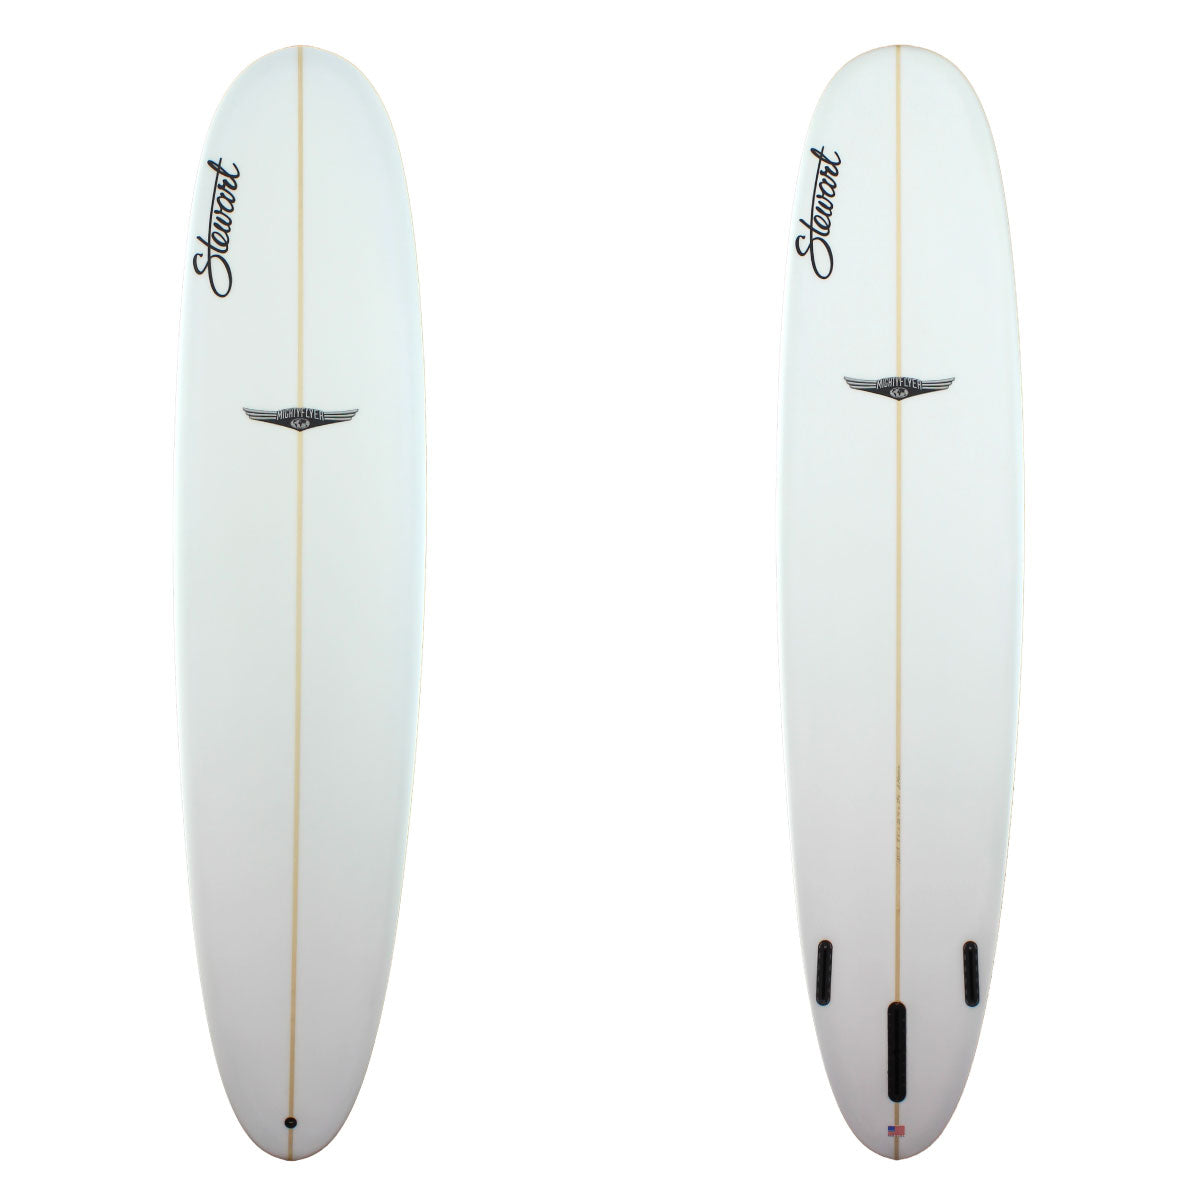 Stewart Surfboards 8'6" Mighty Flyer with clear white deck and bottom